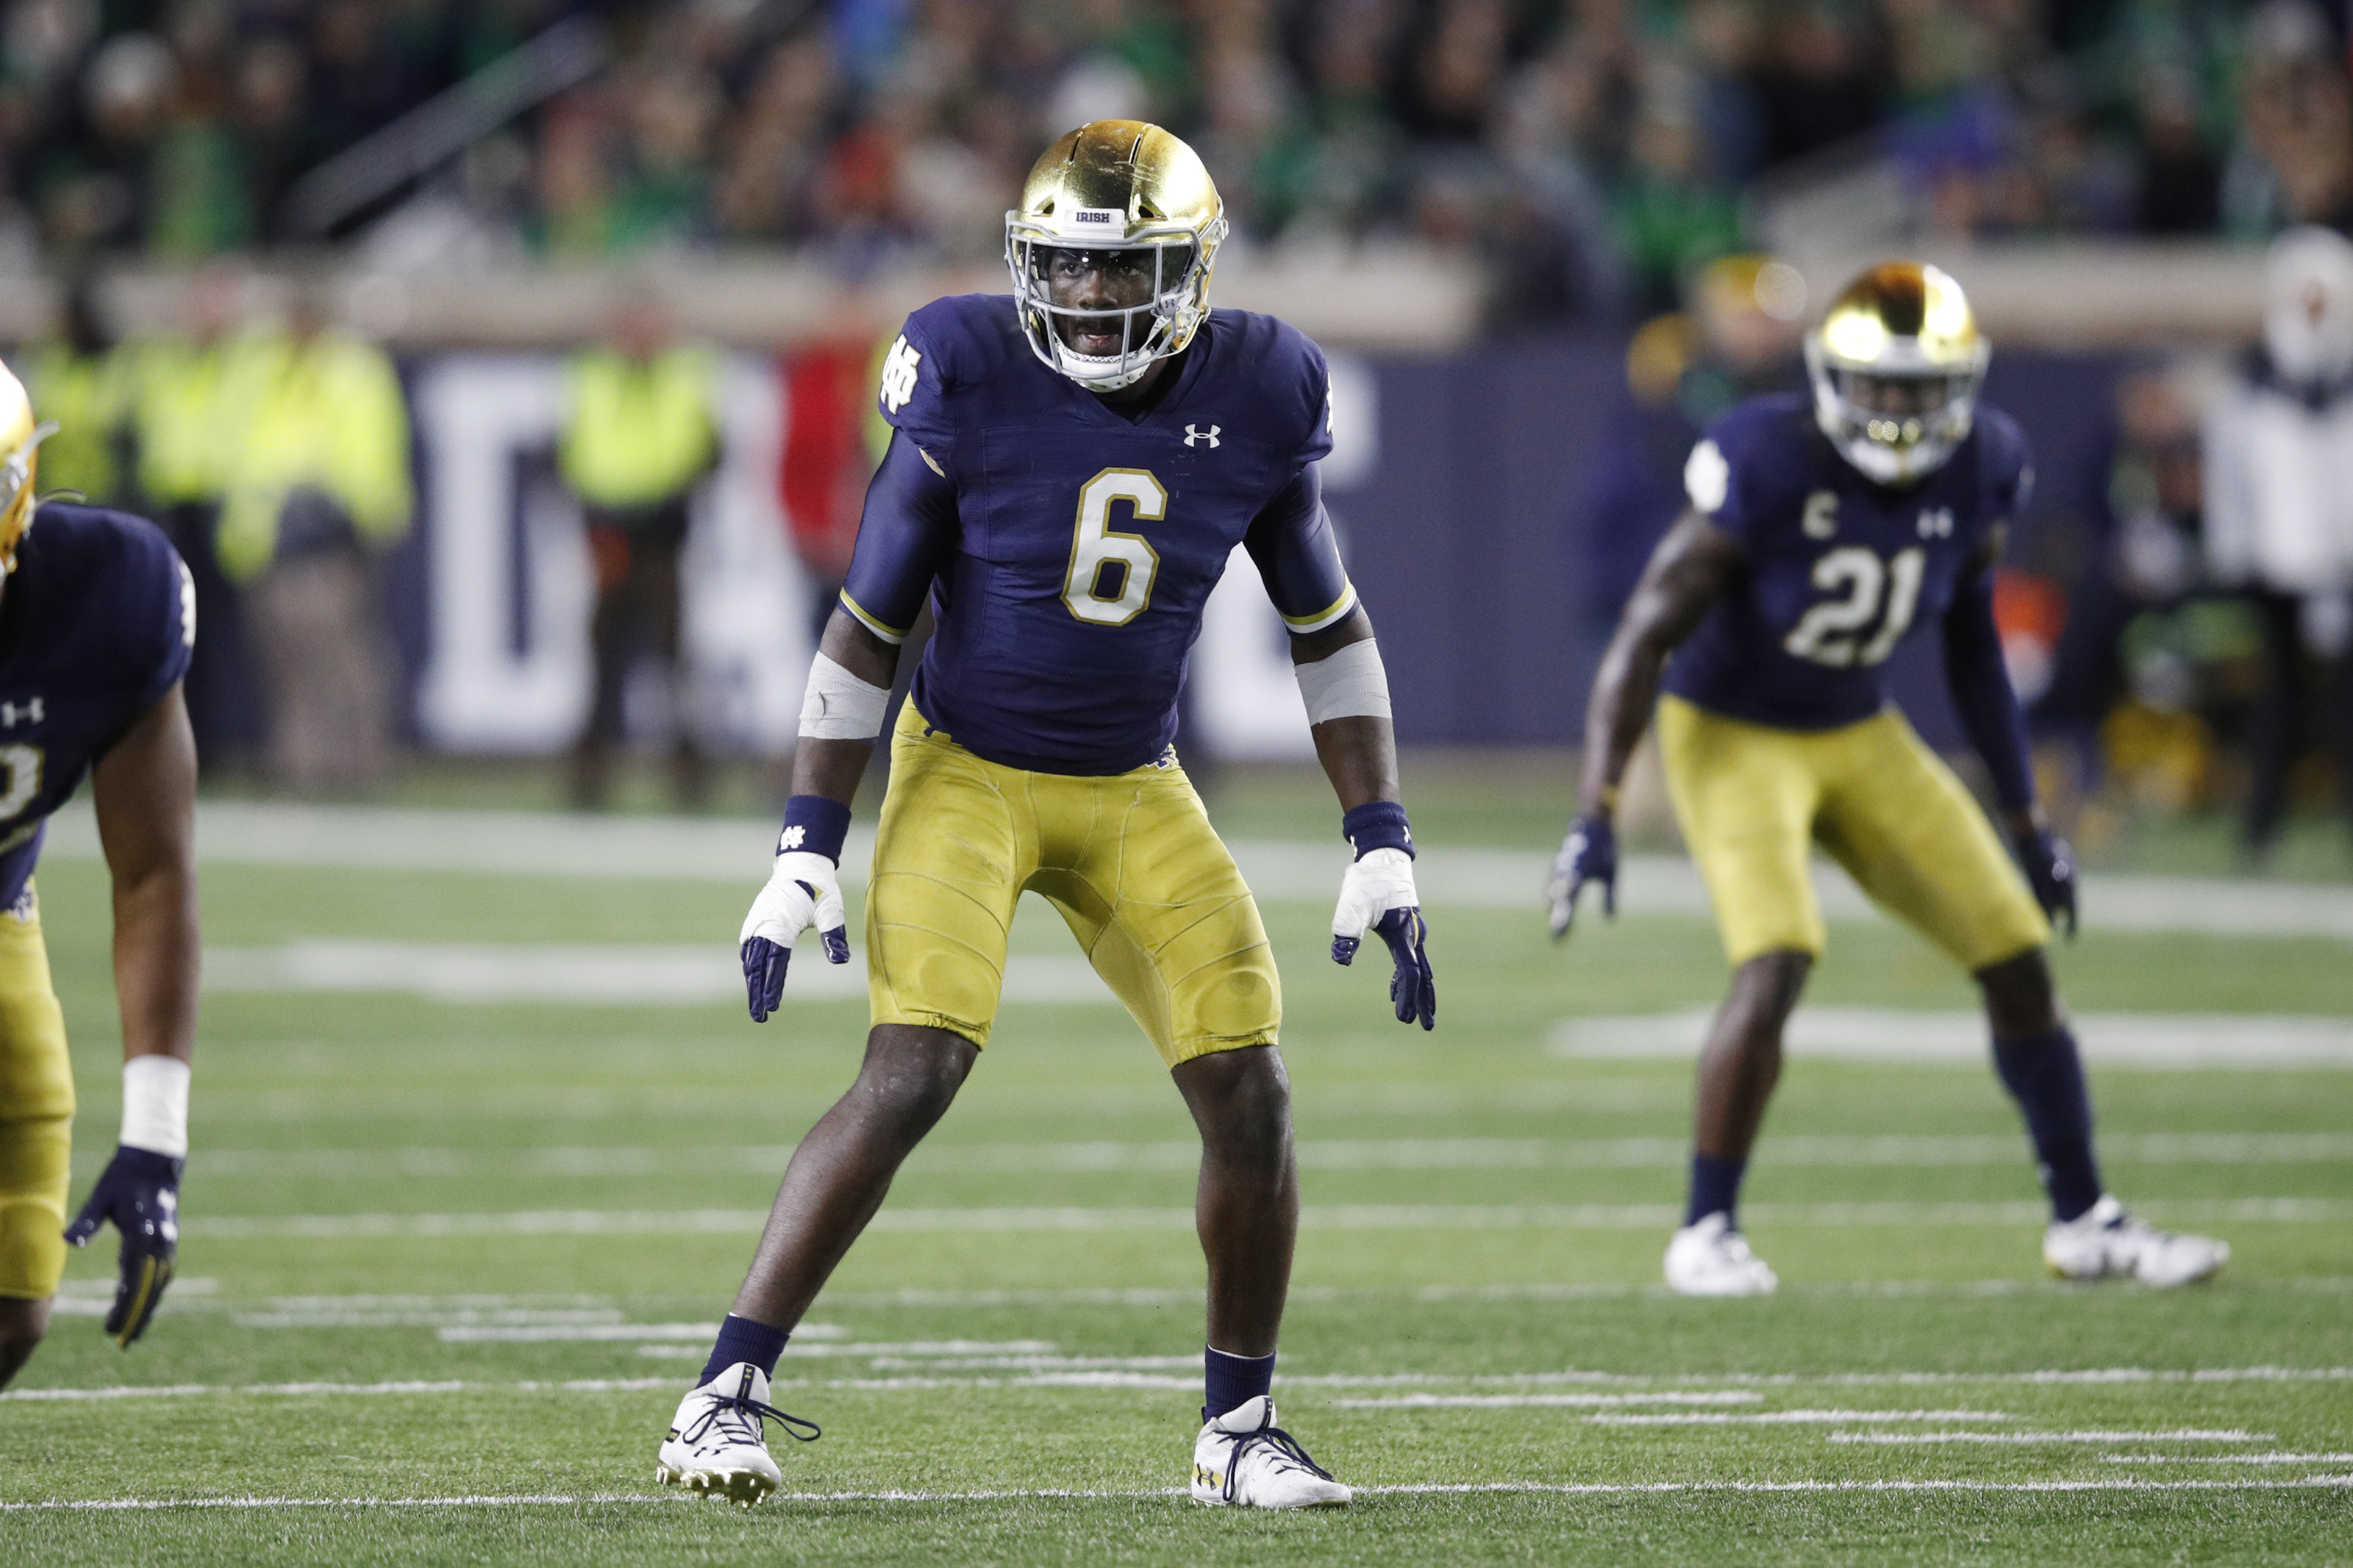 Notre Dame Football: JOK rated best coverage LB in 2021 NFL Draft